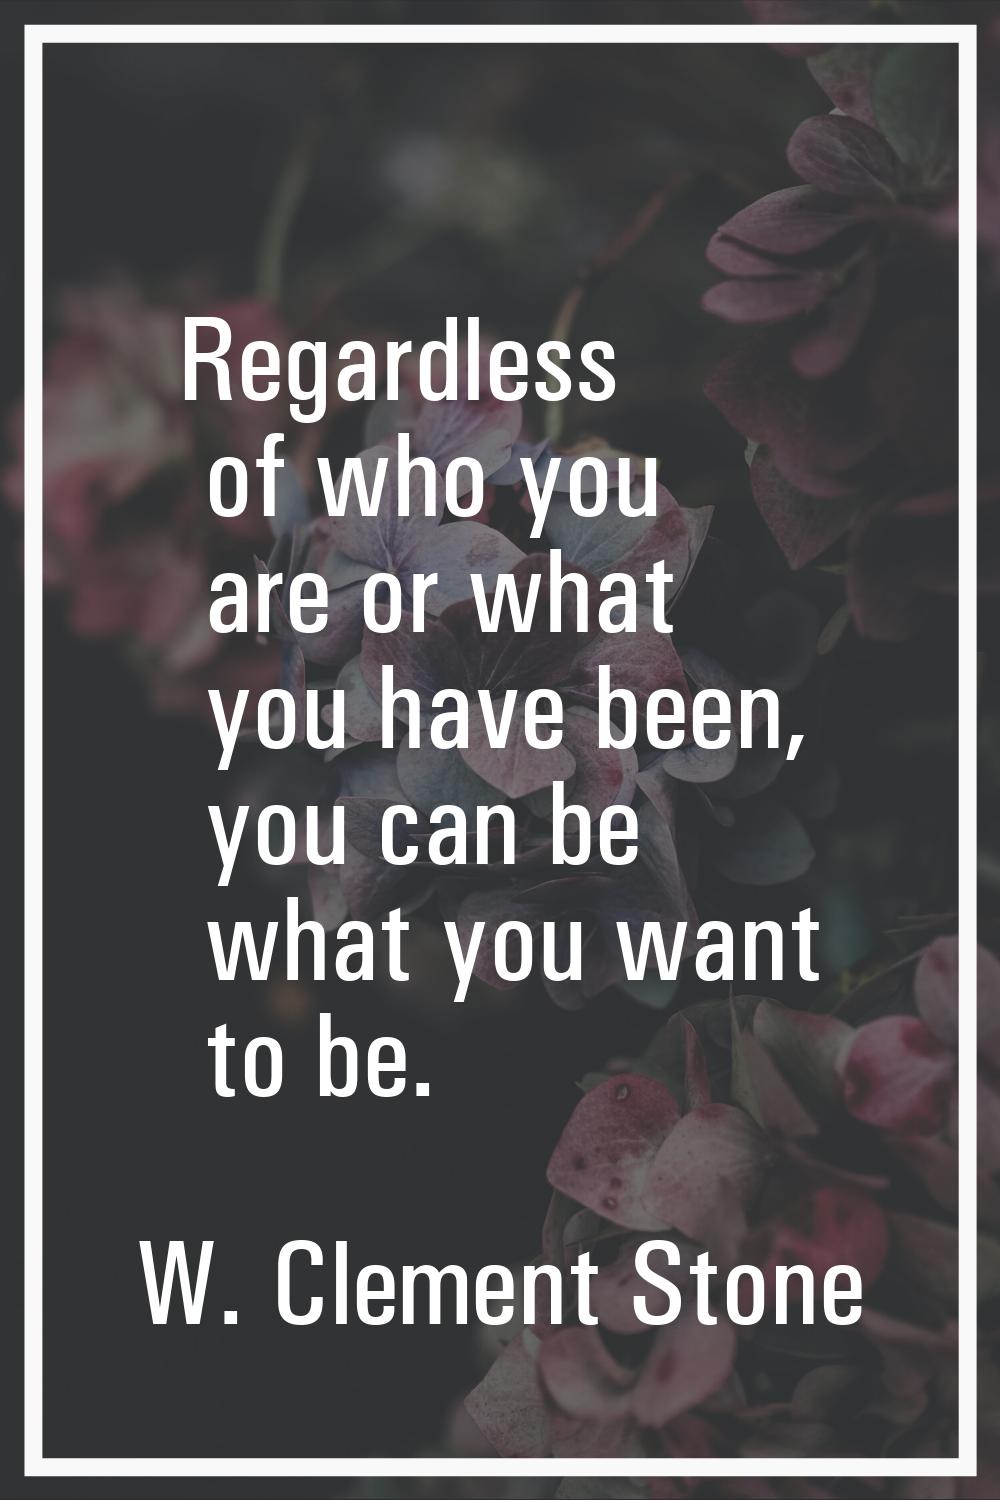 Regardless of who you are or what you have been, you can be what you want to be.